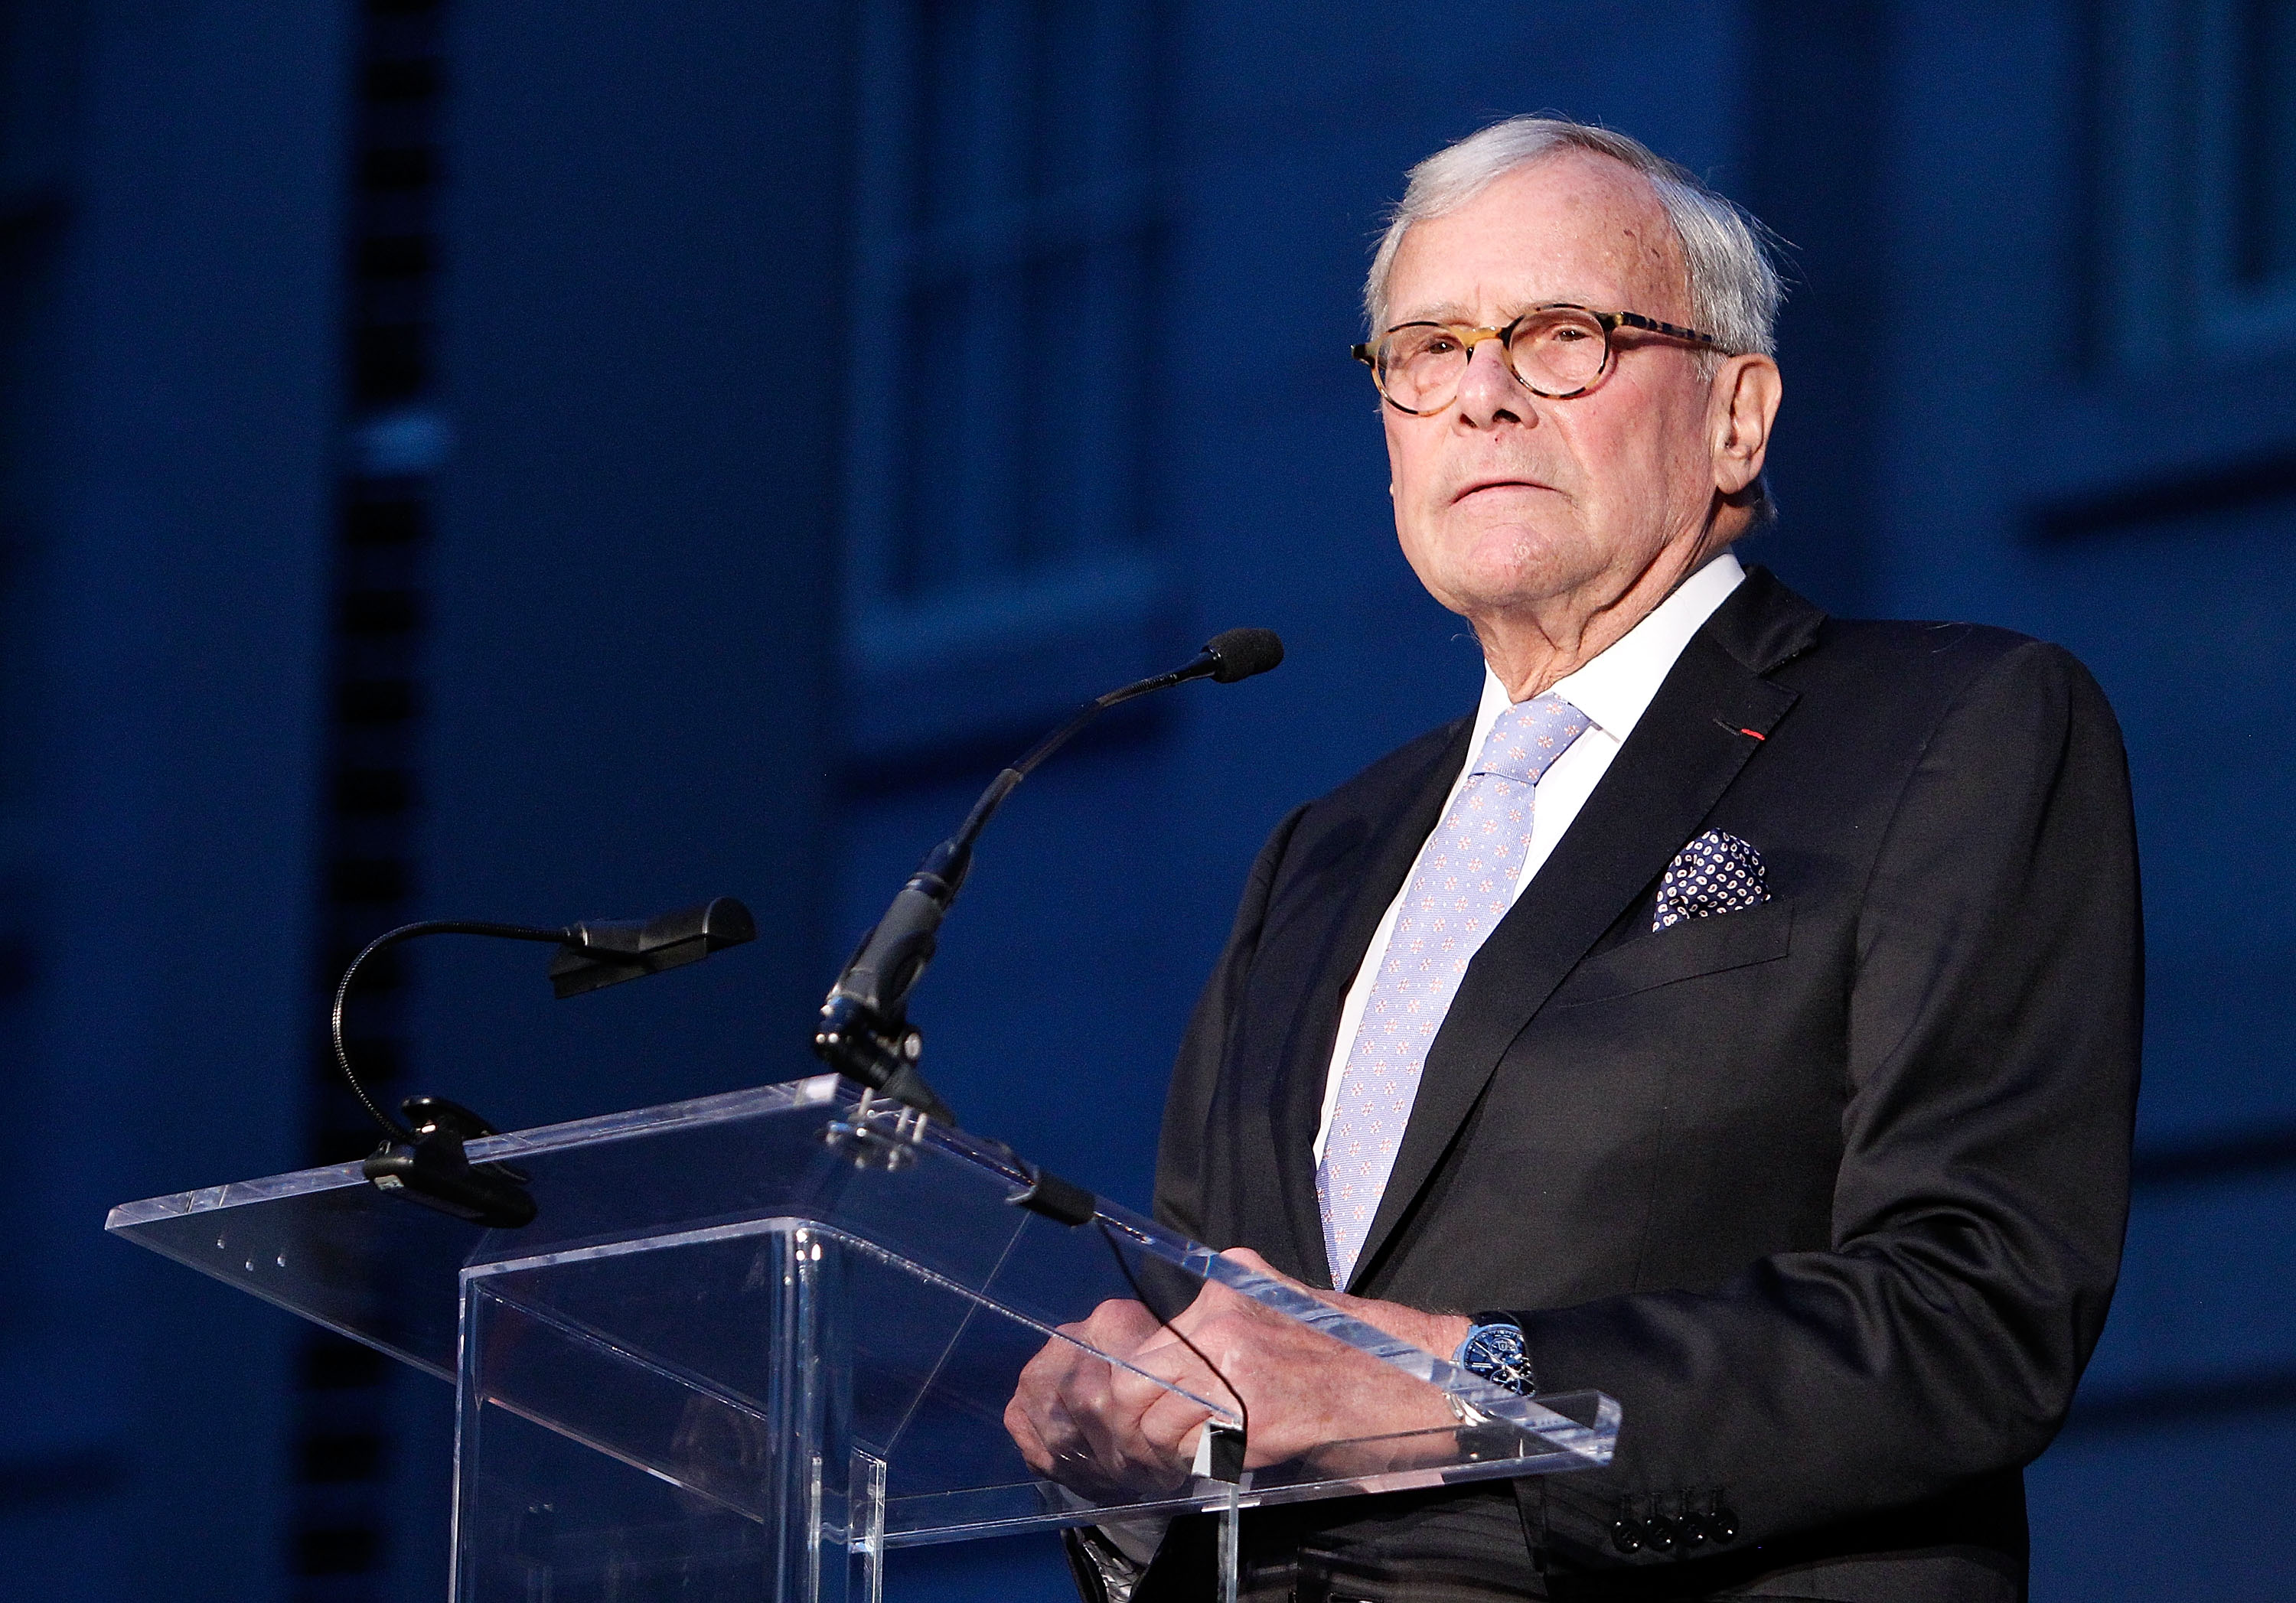 Tom Brokaw, NBC anchor and author, speaks at the American Visionary: John F. Kennedy's Life and Times debut gala | Source: Getty Images